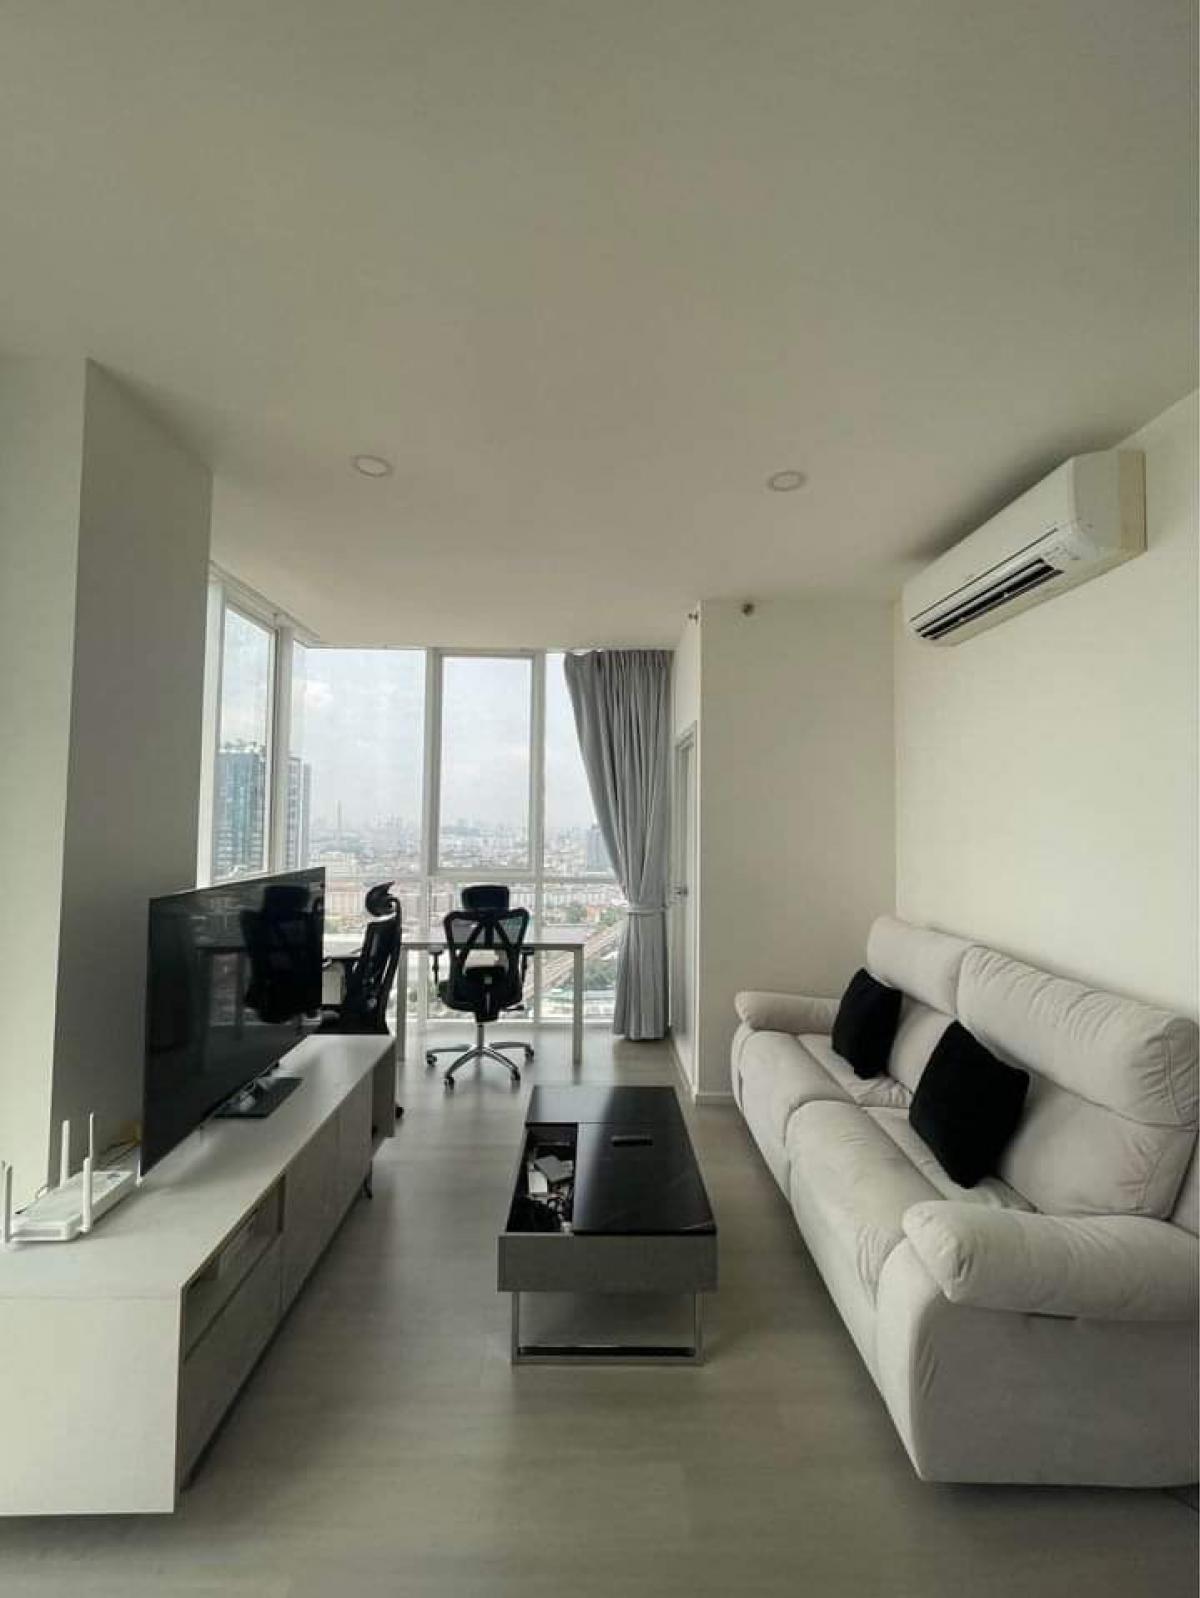 For SaleCondoPinklao, Charansanitwong : For sale: De LAPIS Charan 81 -- De LAPIS Charan 81, 2 bedrooms, 2 bathrooms, high floor, open view, best price.